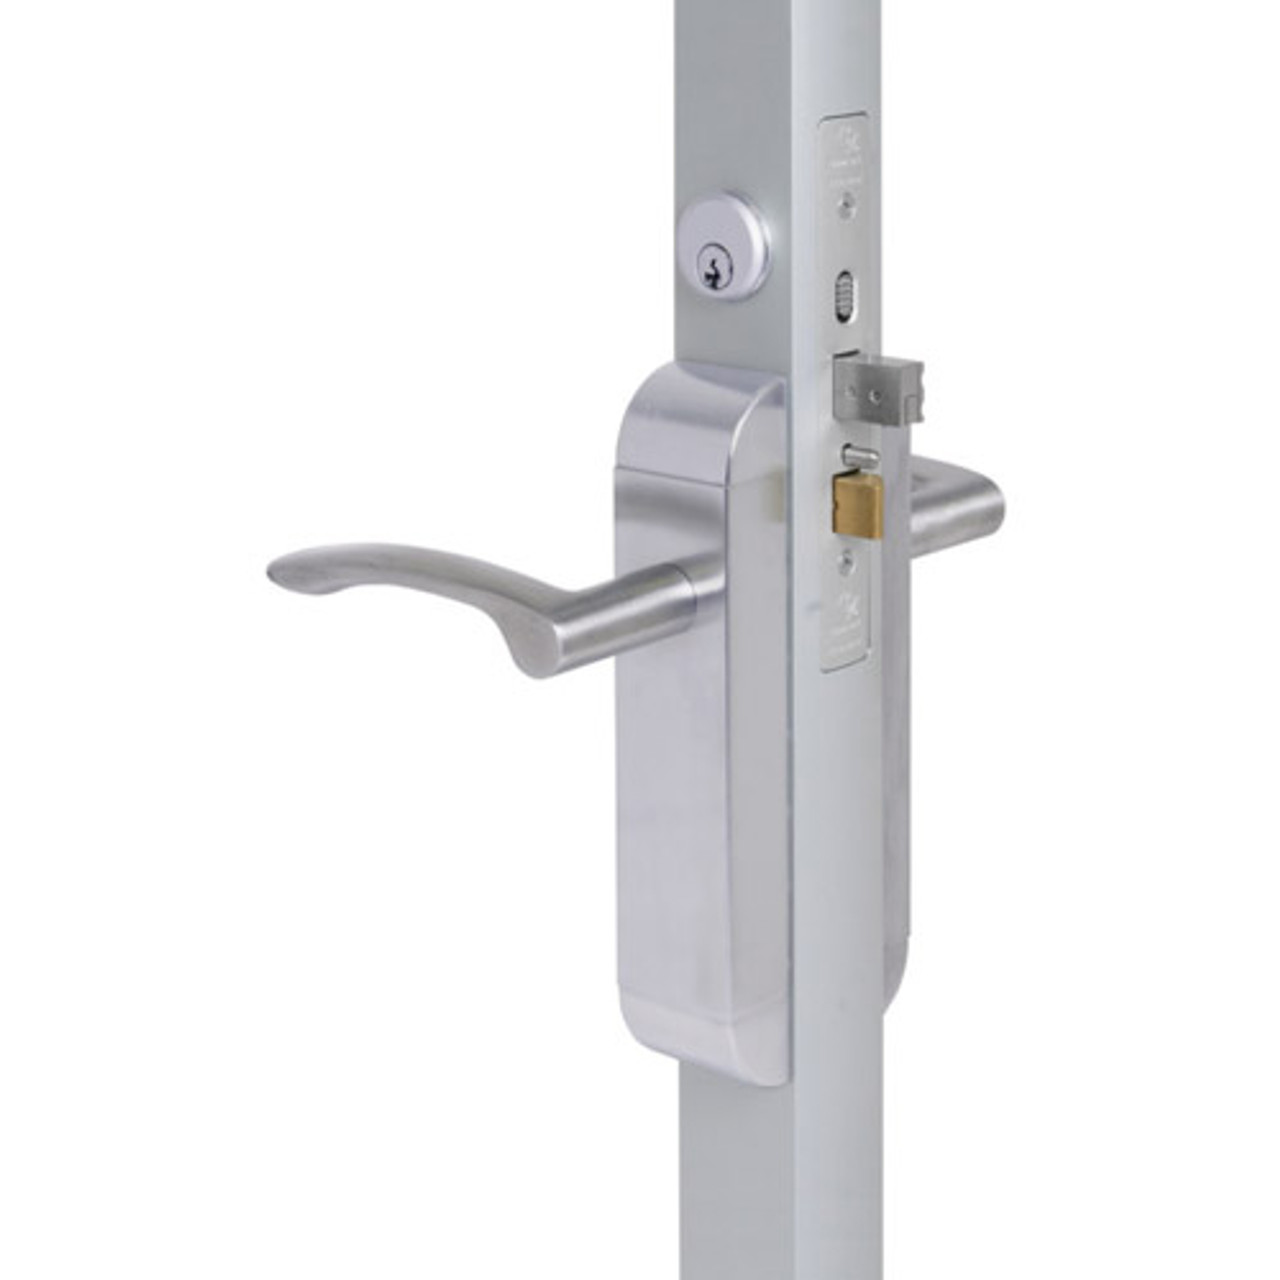 2190-421-202-32 Adams Rite Dual Force Interconnected 2190 series Deadlock/Deadlatch in Bright Stainless